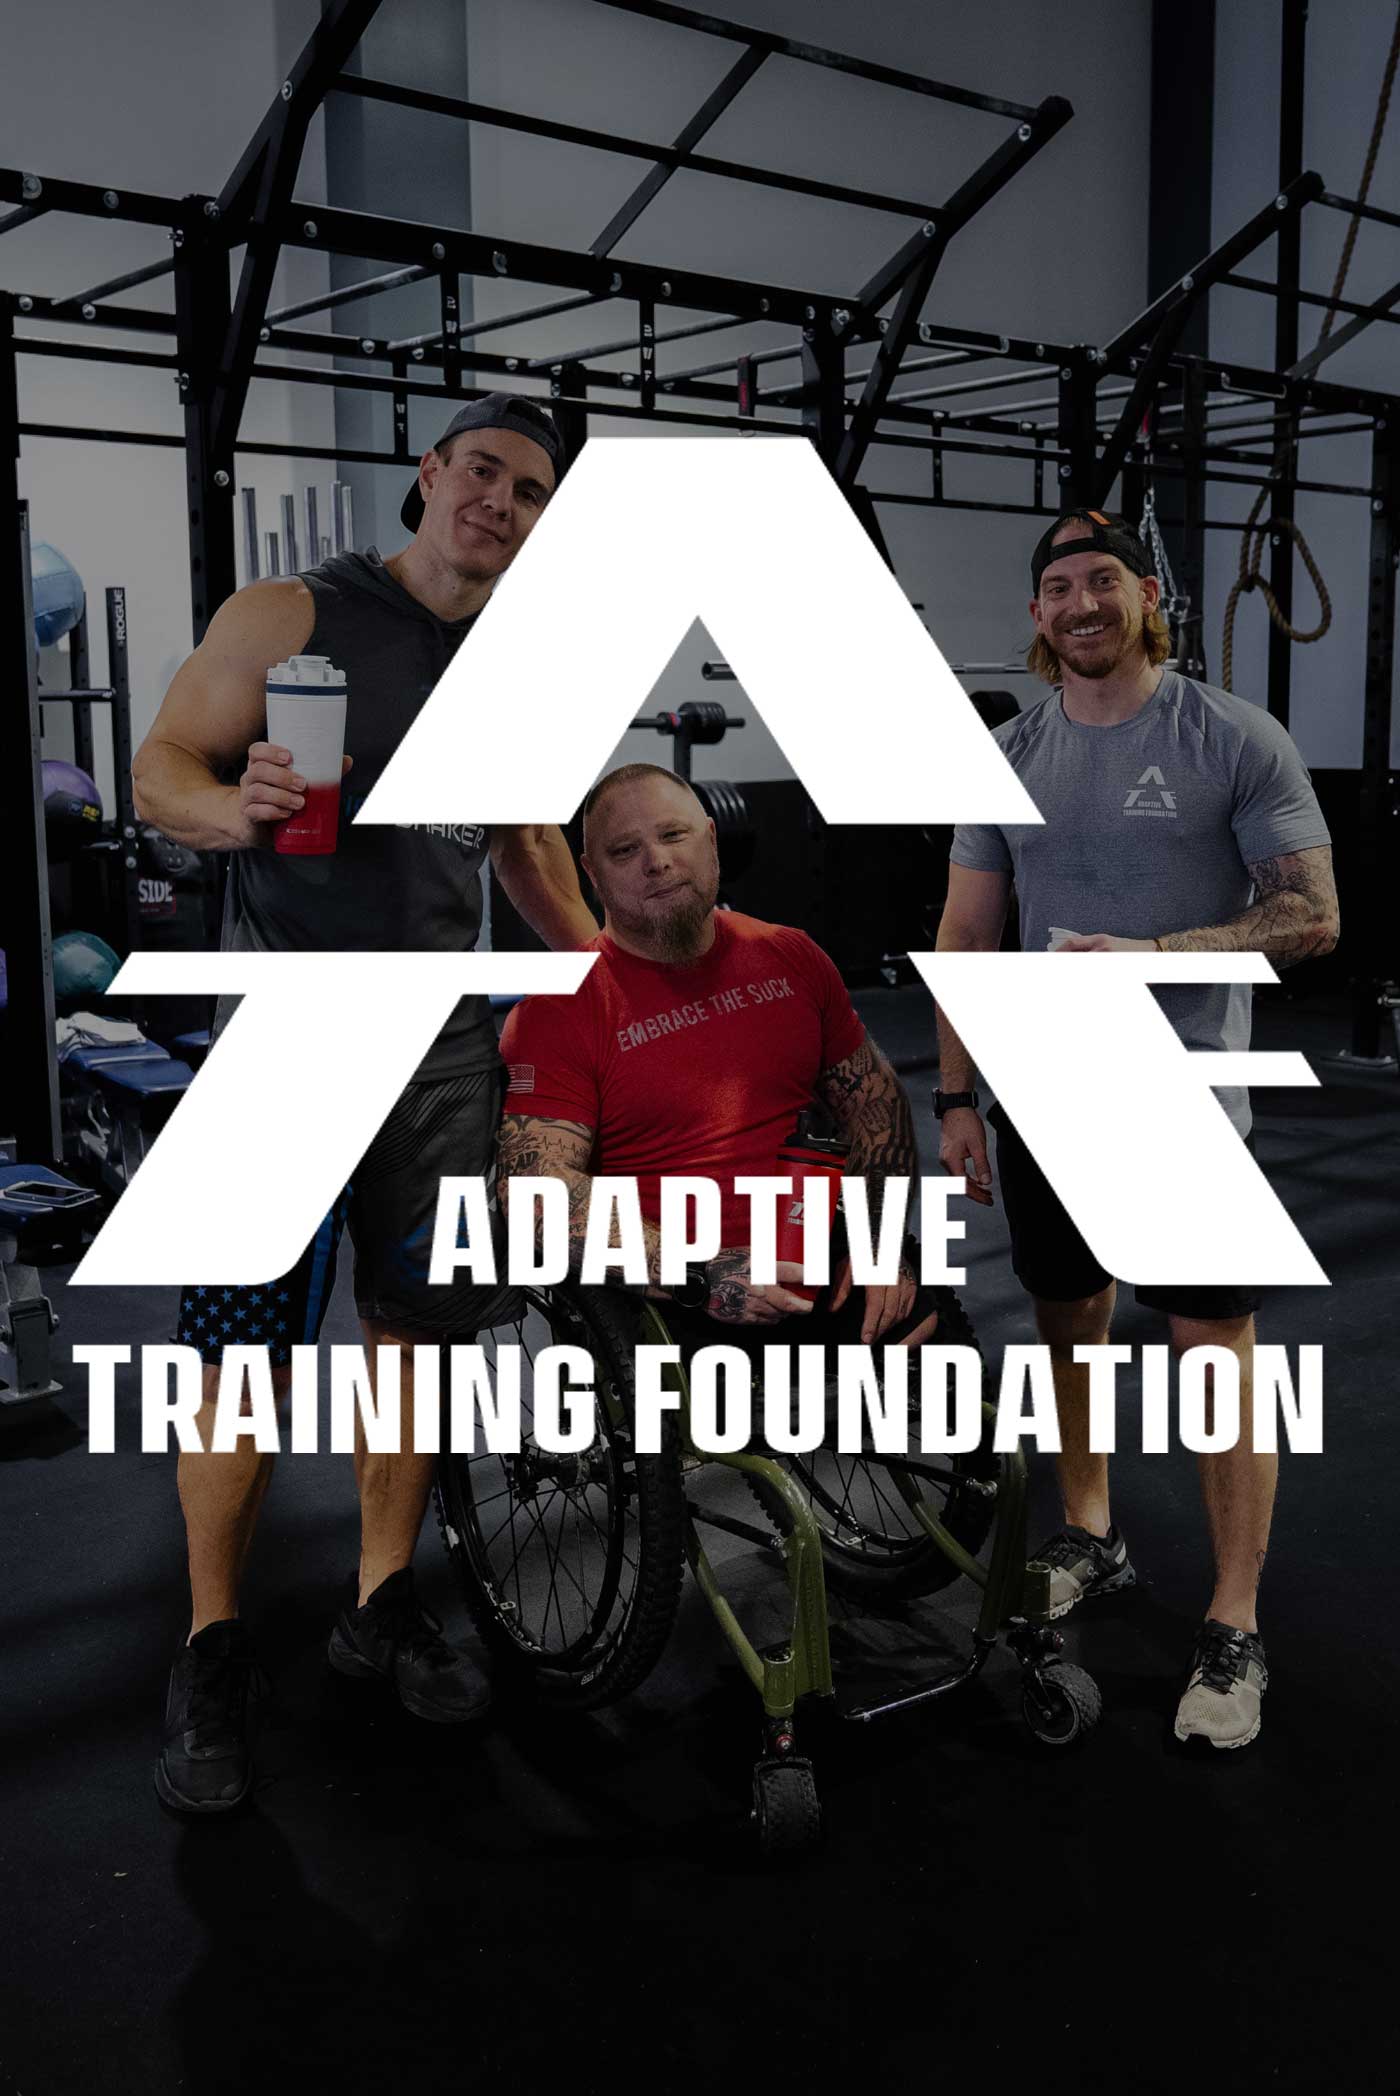 Ice Shaker CEO, Chris Gronkowski takes a picture with an Adaptive Training Foundation trainee and trainer. The Adaptive Training Foundation logo is overlayed on top of the image.